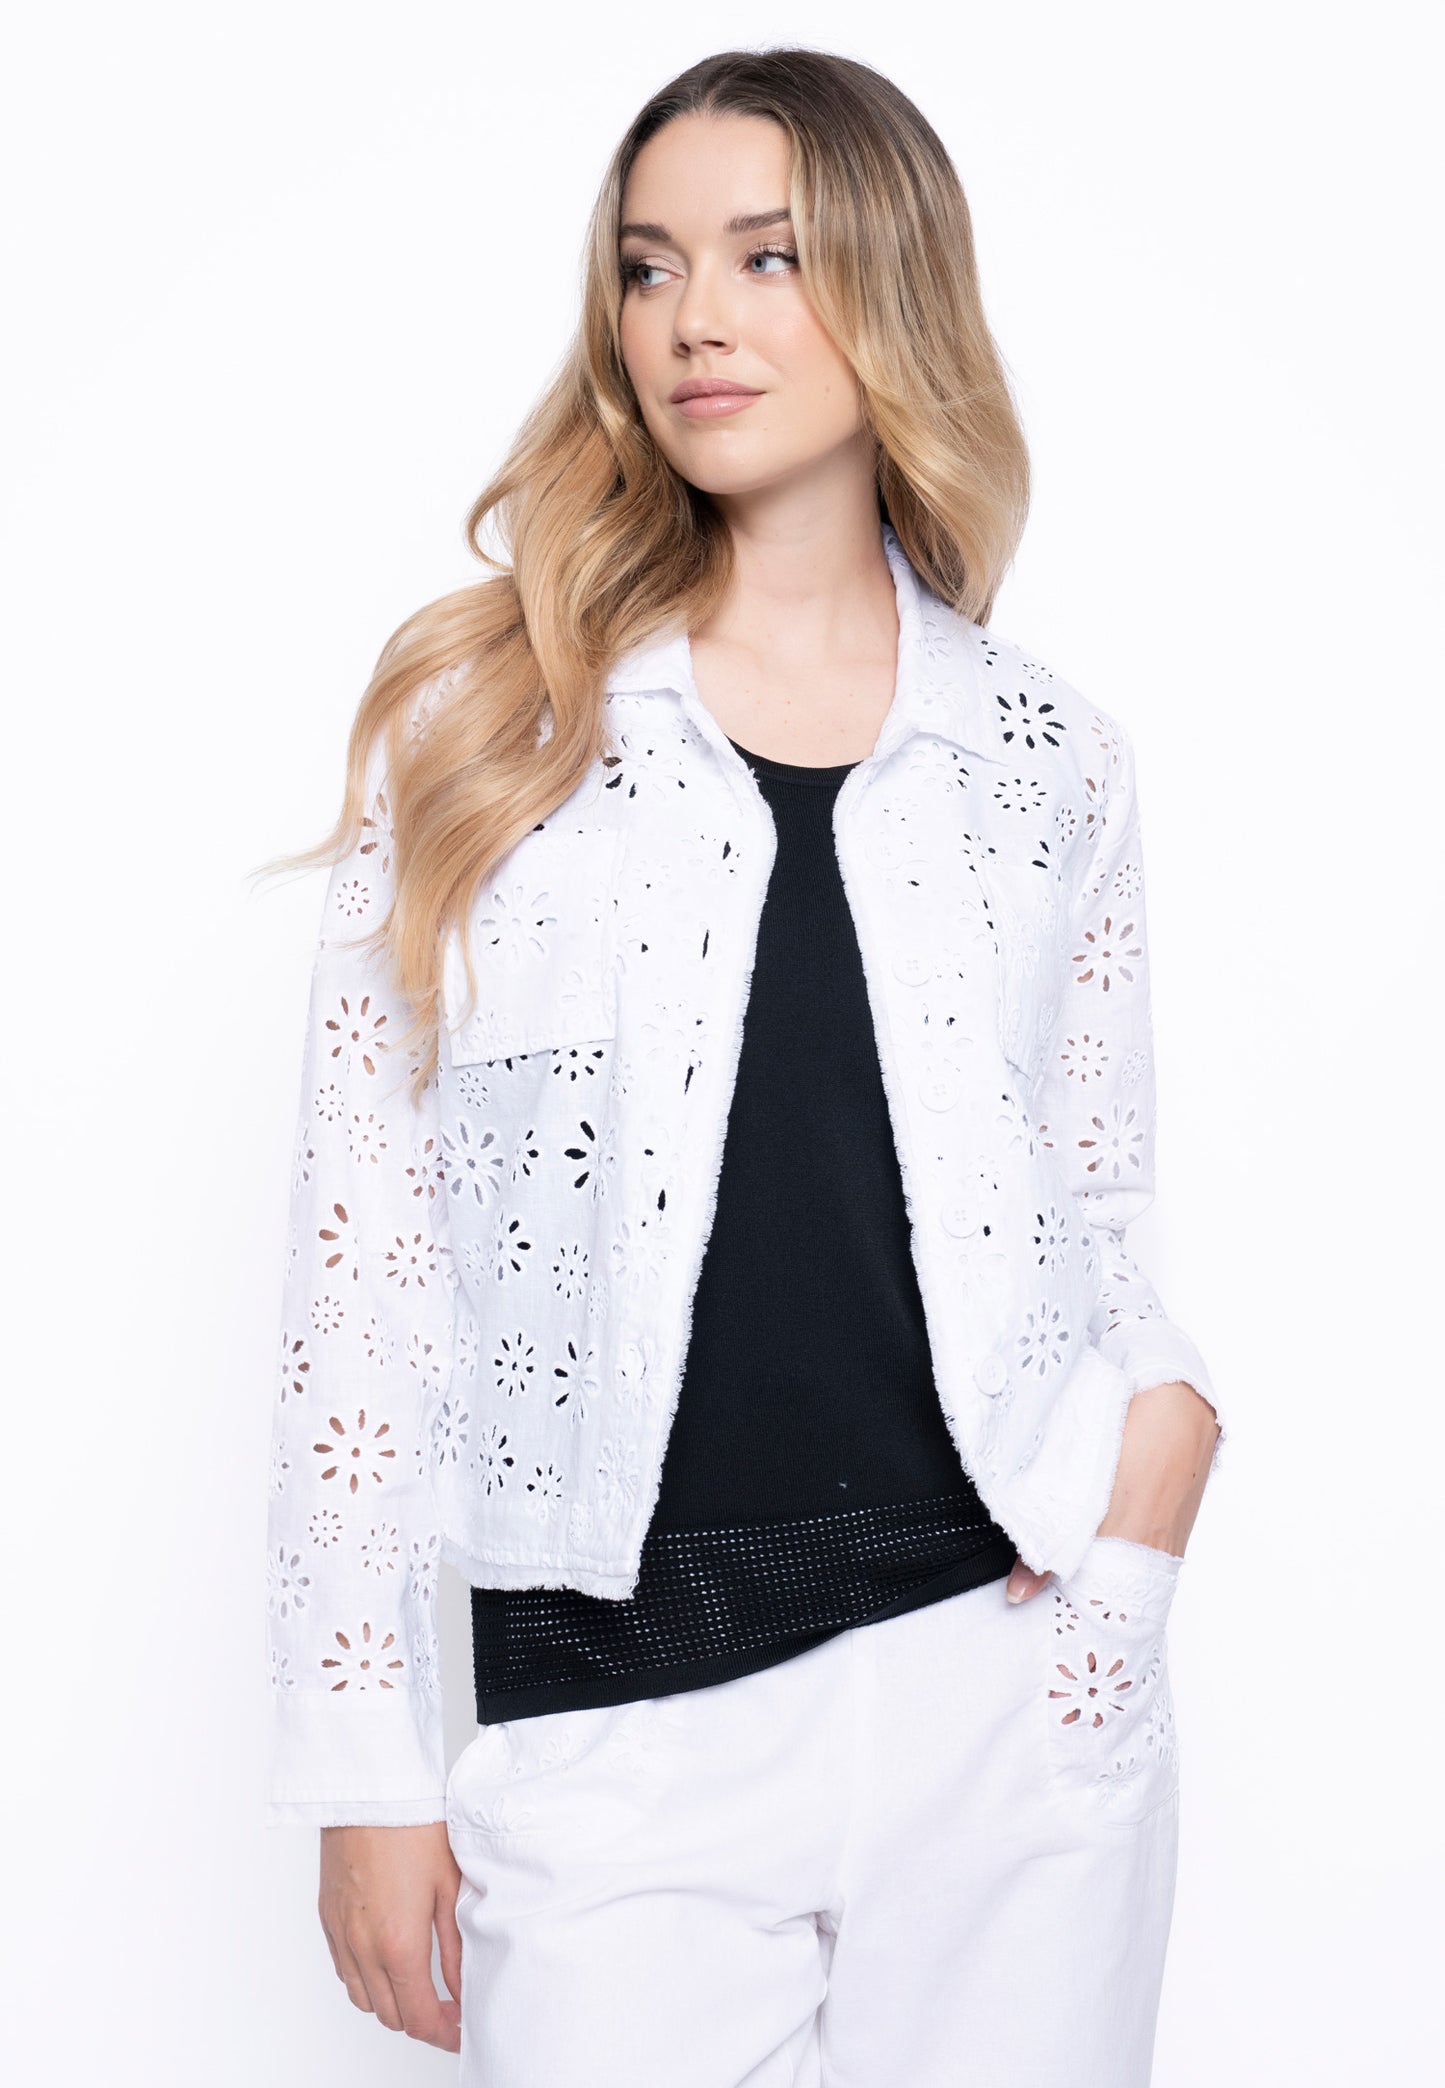 Showing the Pull-On Straight Leg Pants in White color with the matching Eyelet Embellished Jacket in white.